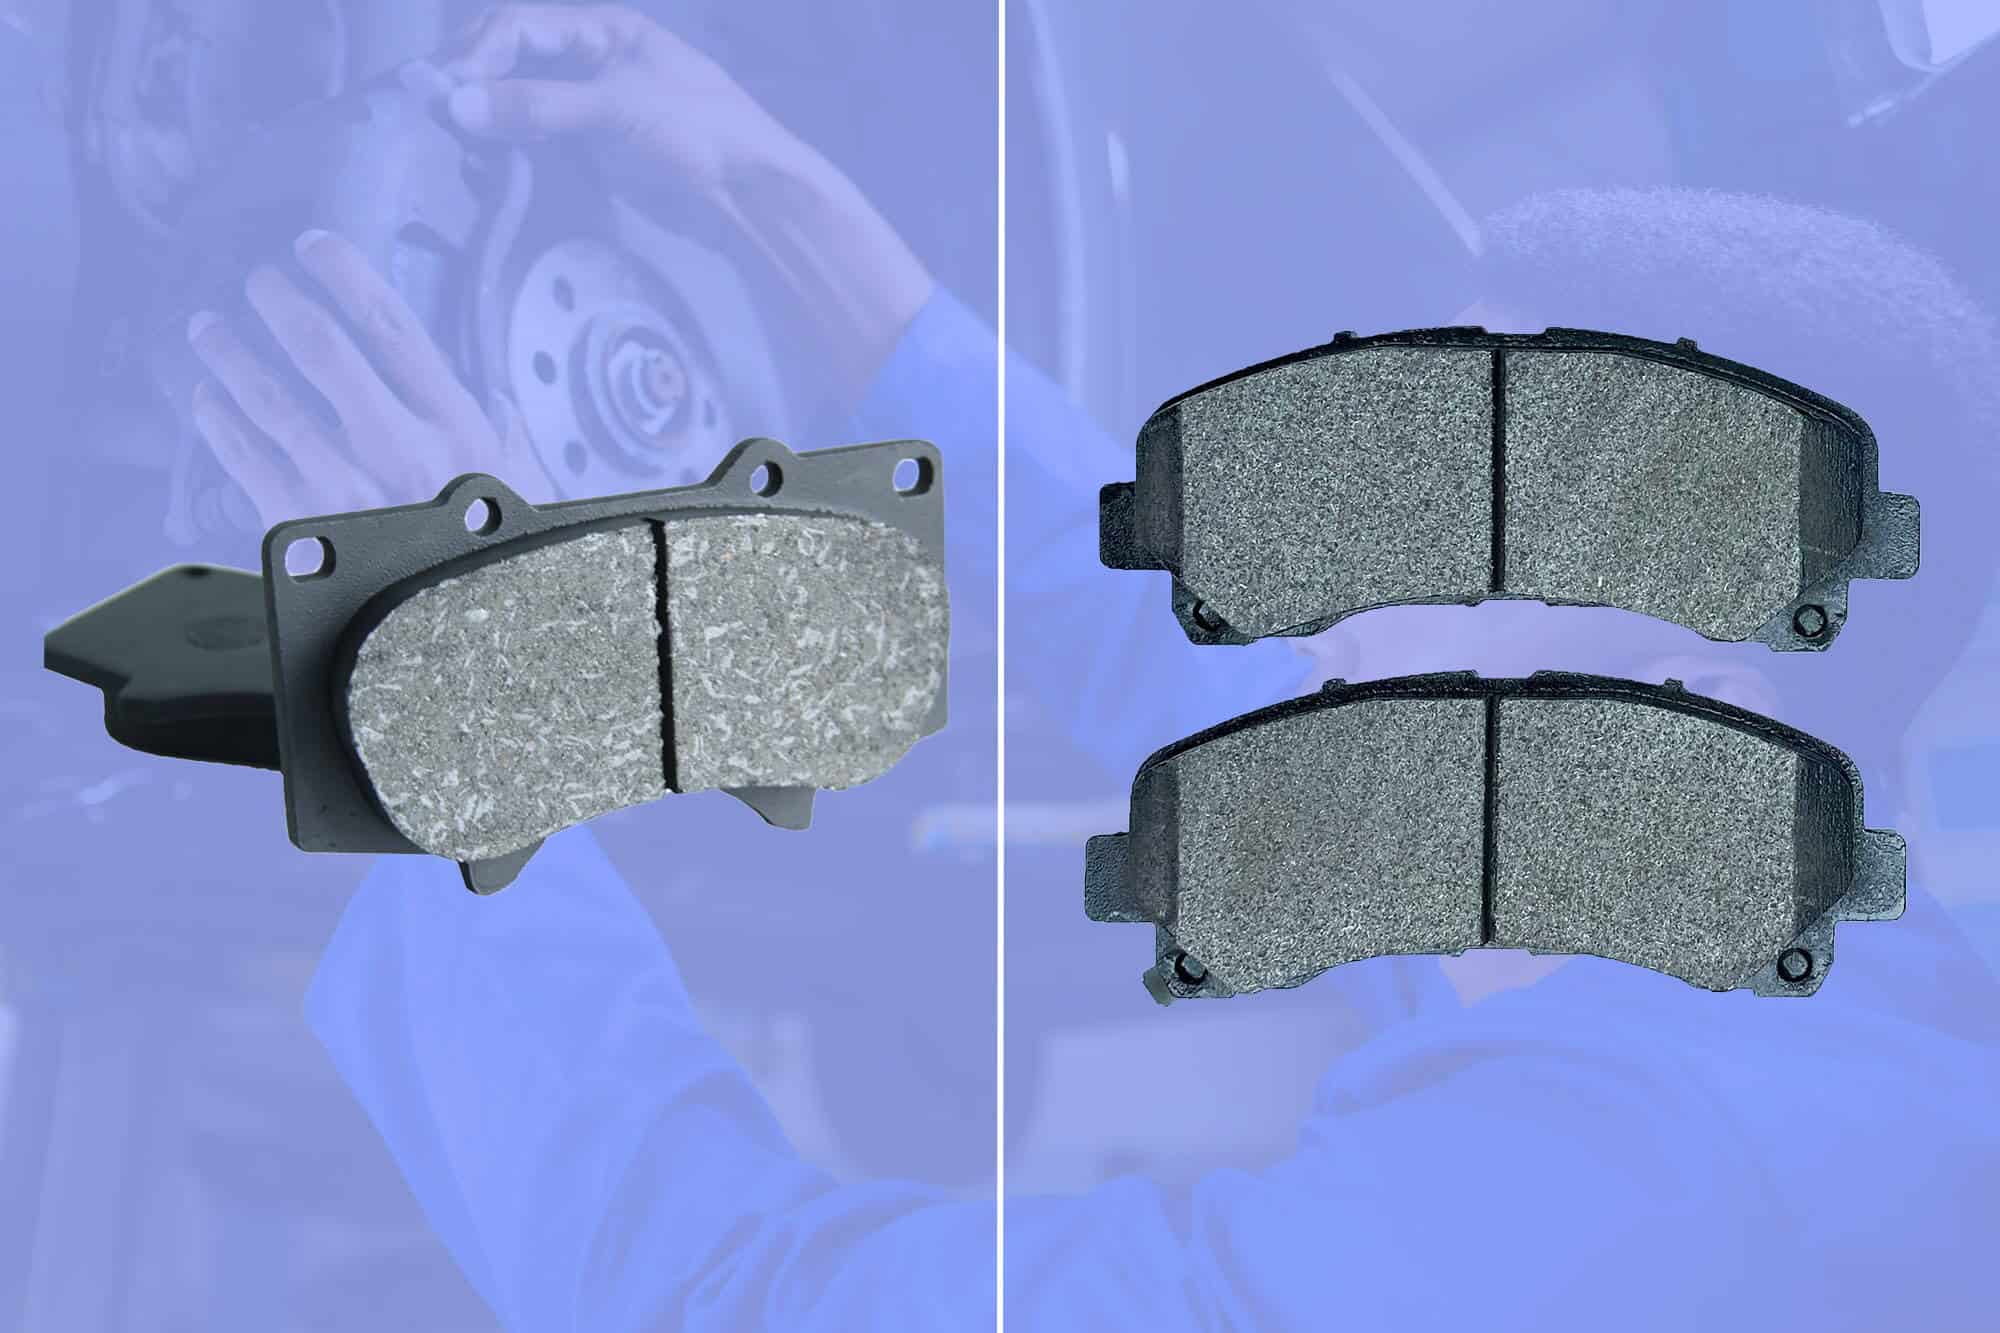 The Pros and Cons of Organic vs Metallic Brake Pads: Which is Better for Your Car?